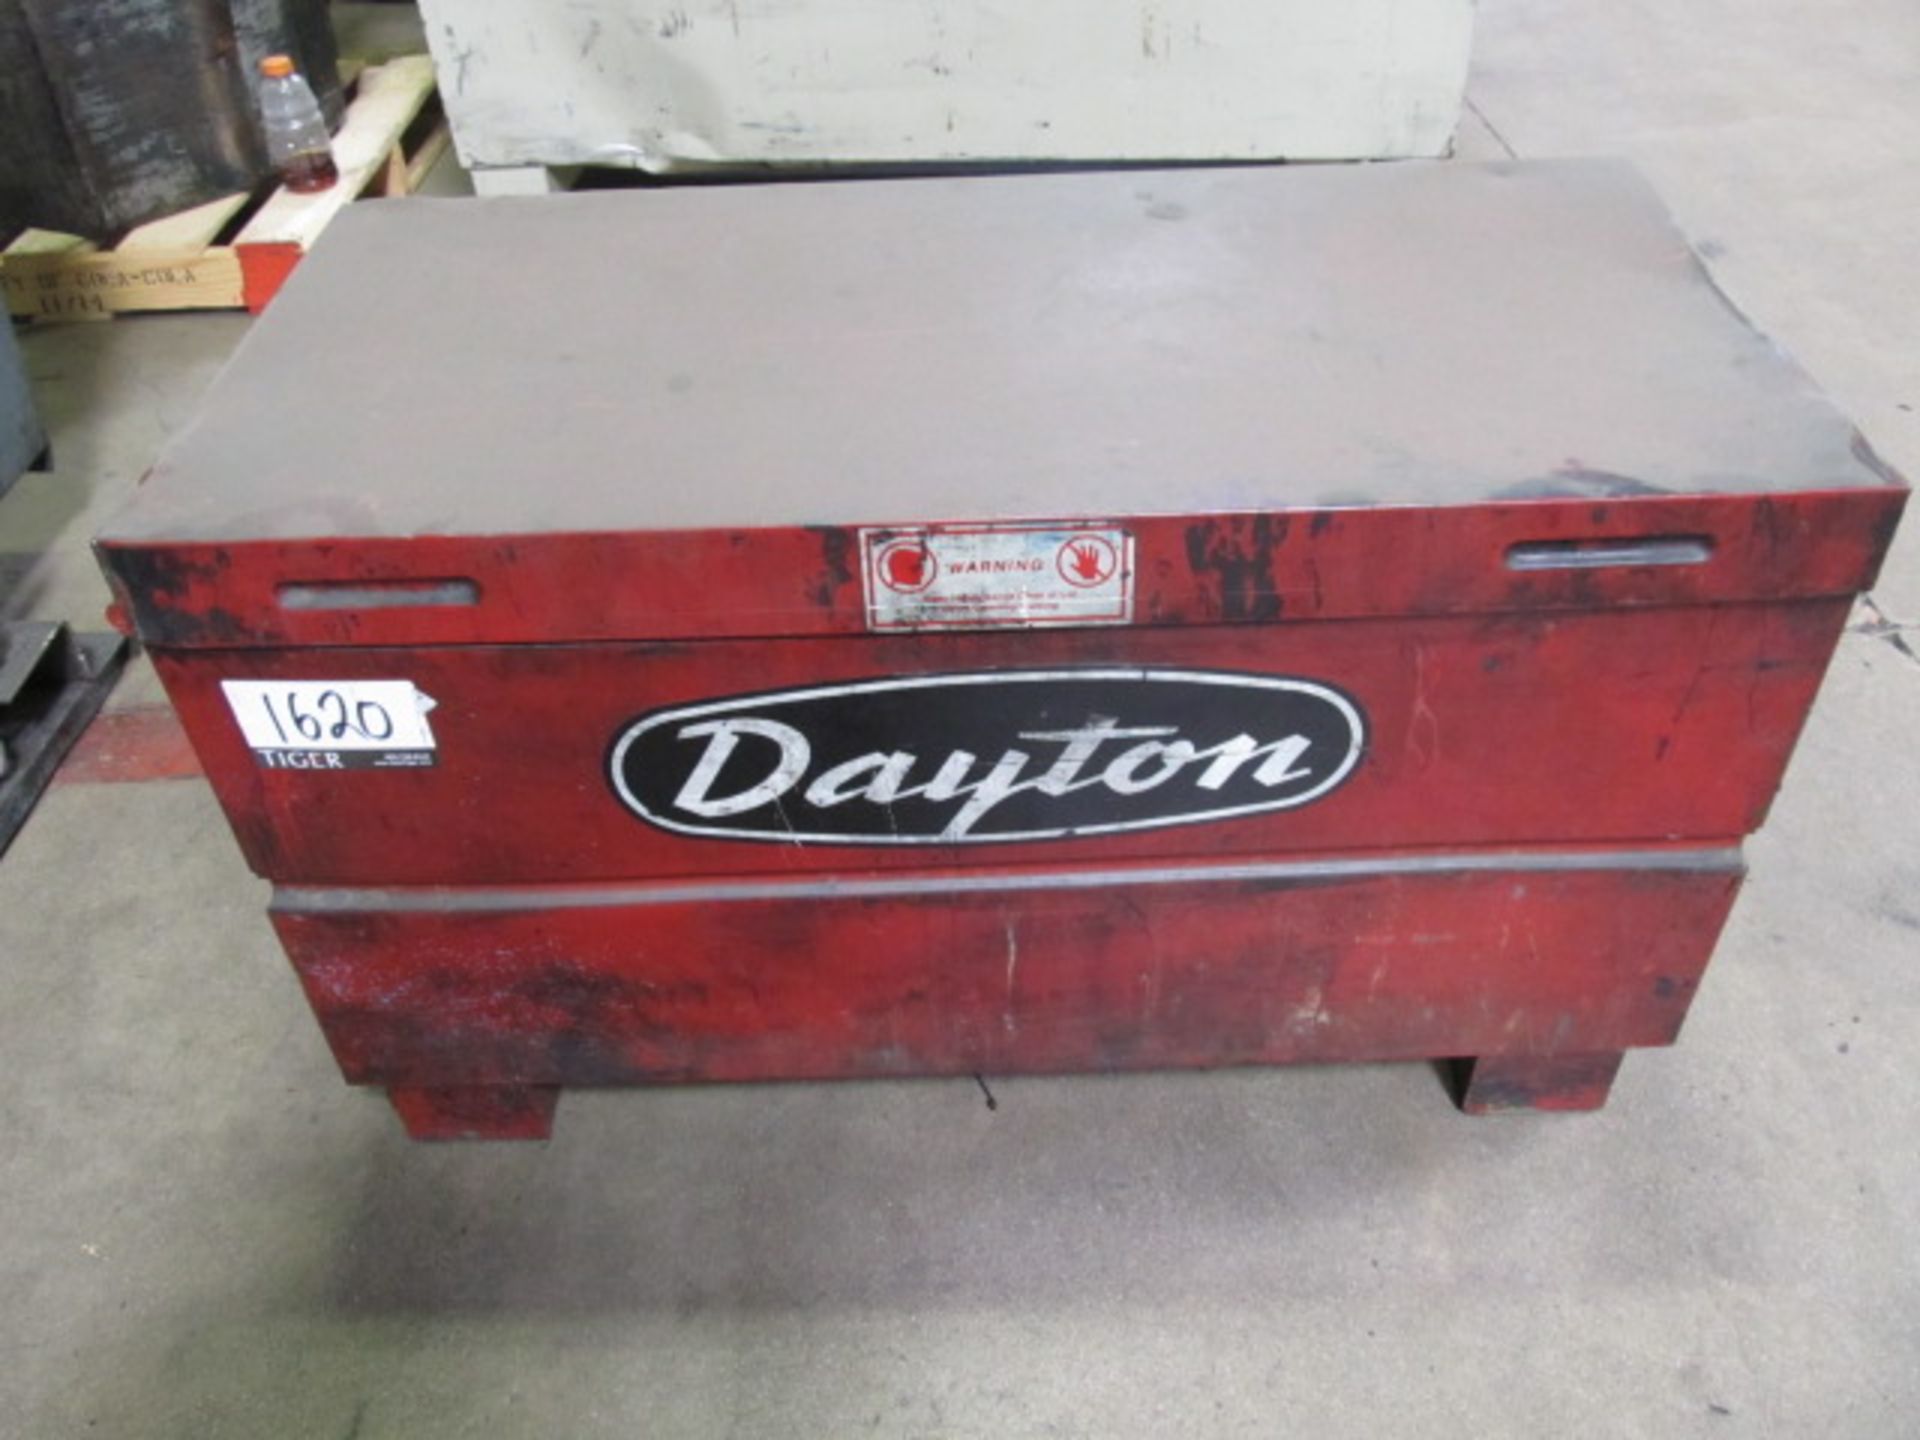 Dayton Gang Box With Assorted Rigging Straps, Approx.. 25 Pcs. Asset Location: West Warehouse,